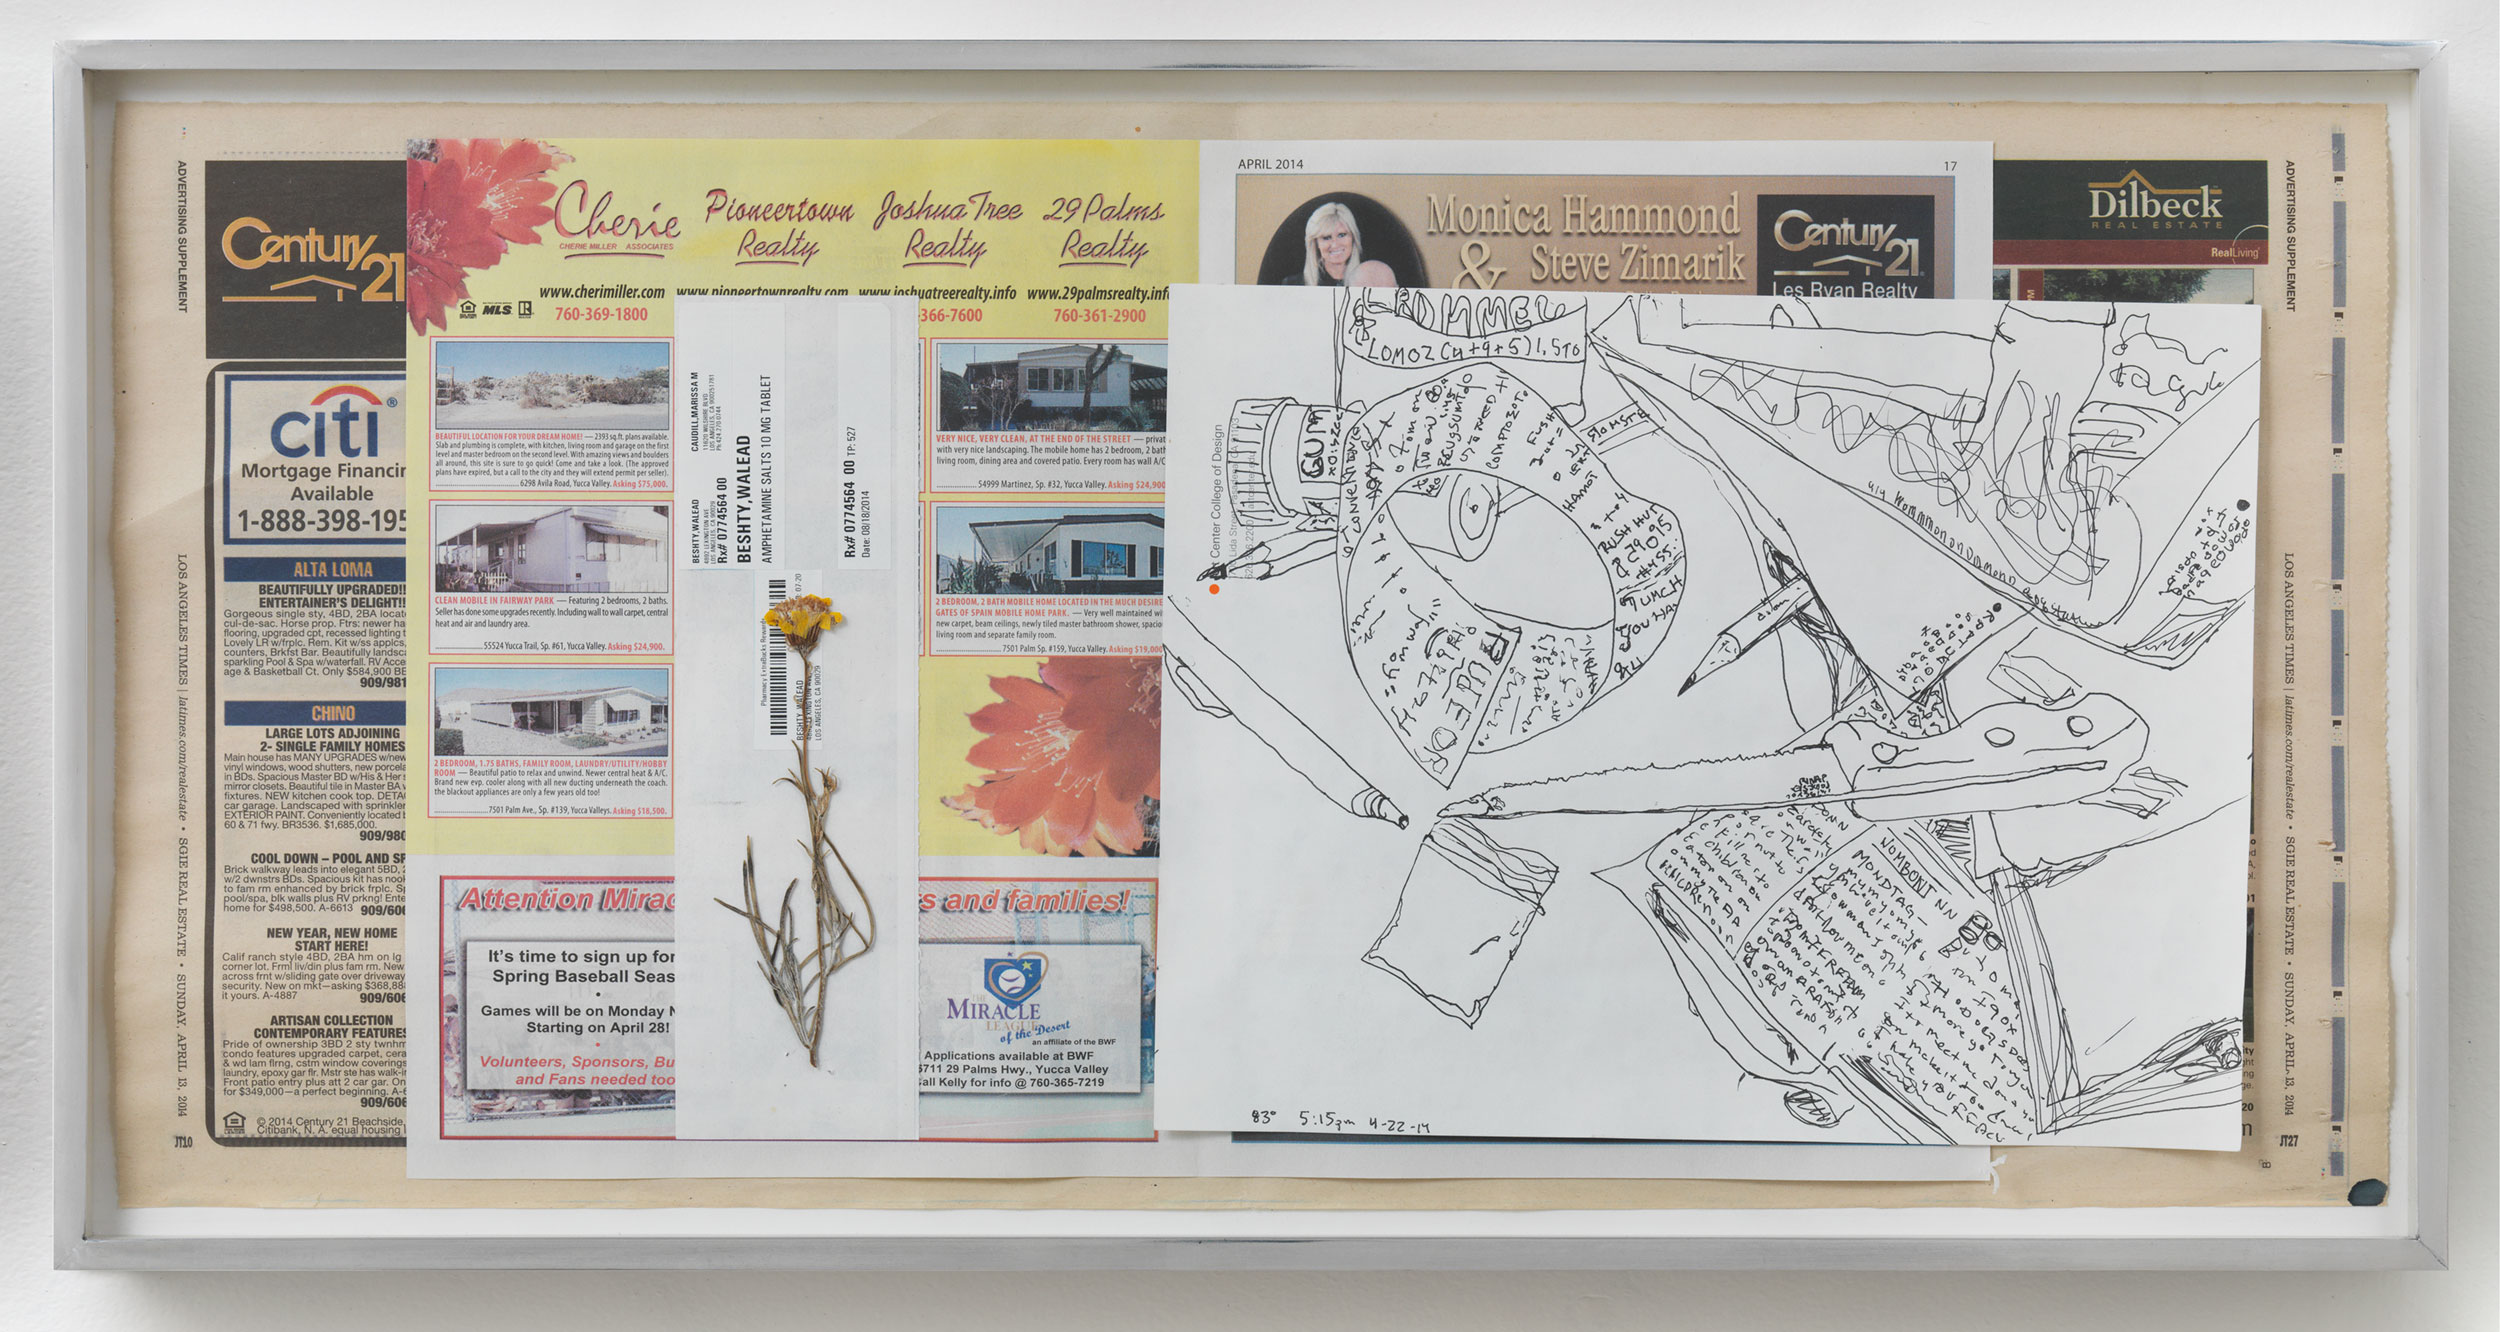   Century 21; Cherie Pioneertown Realty; Joshua Tree Realty; 29 Palms Realty; Dilbeck Real Estate, 83º, 5:15pm, 22-4-14    2014   Ink on paper, receipt, dried flower, newspaper  11 x 22 1/2 inches   Gastarbeiten, 2014     